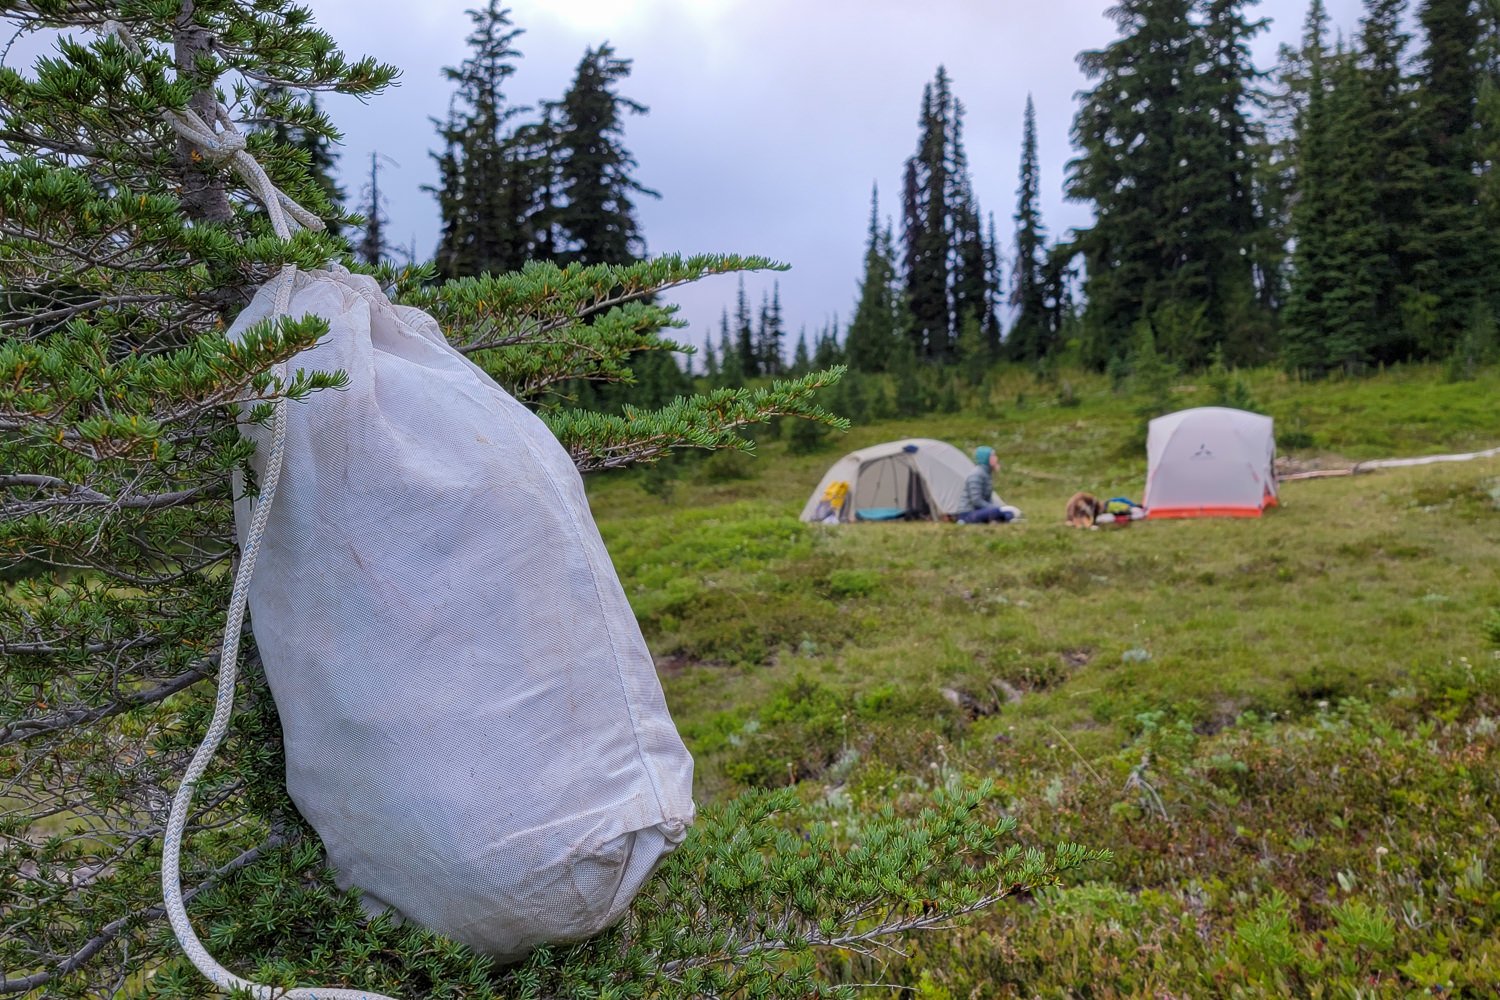 An Ursack tied to a tree near a backpacking site